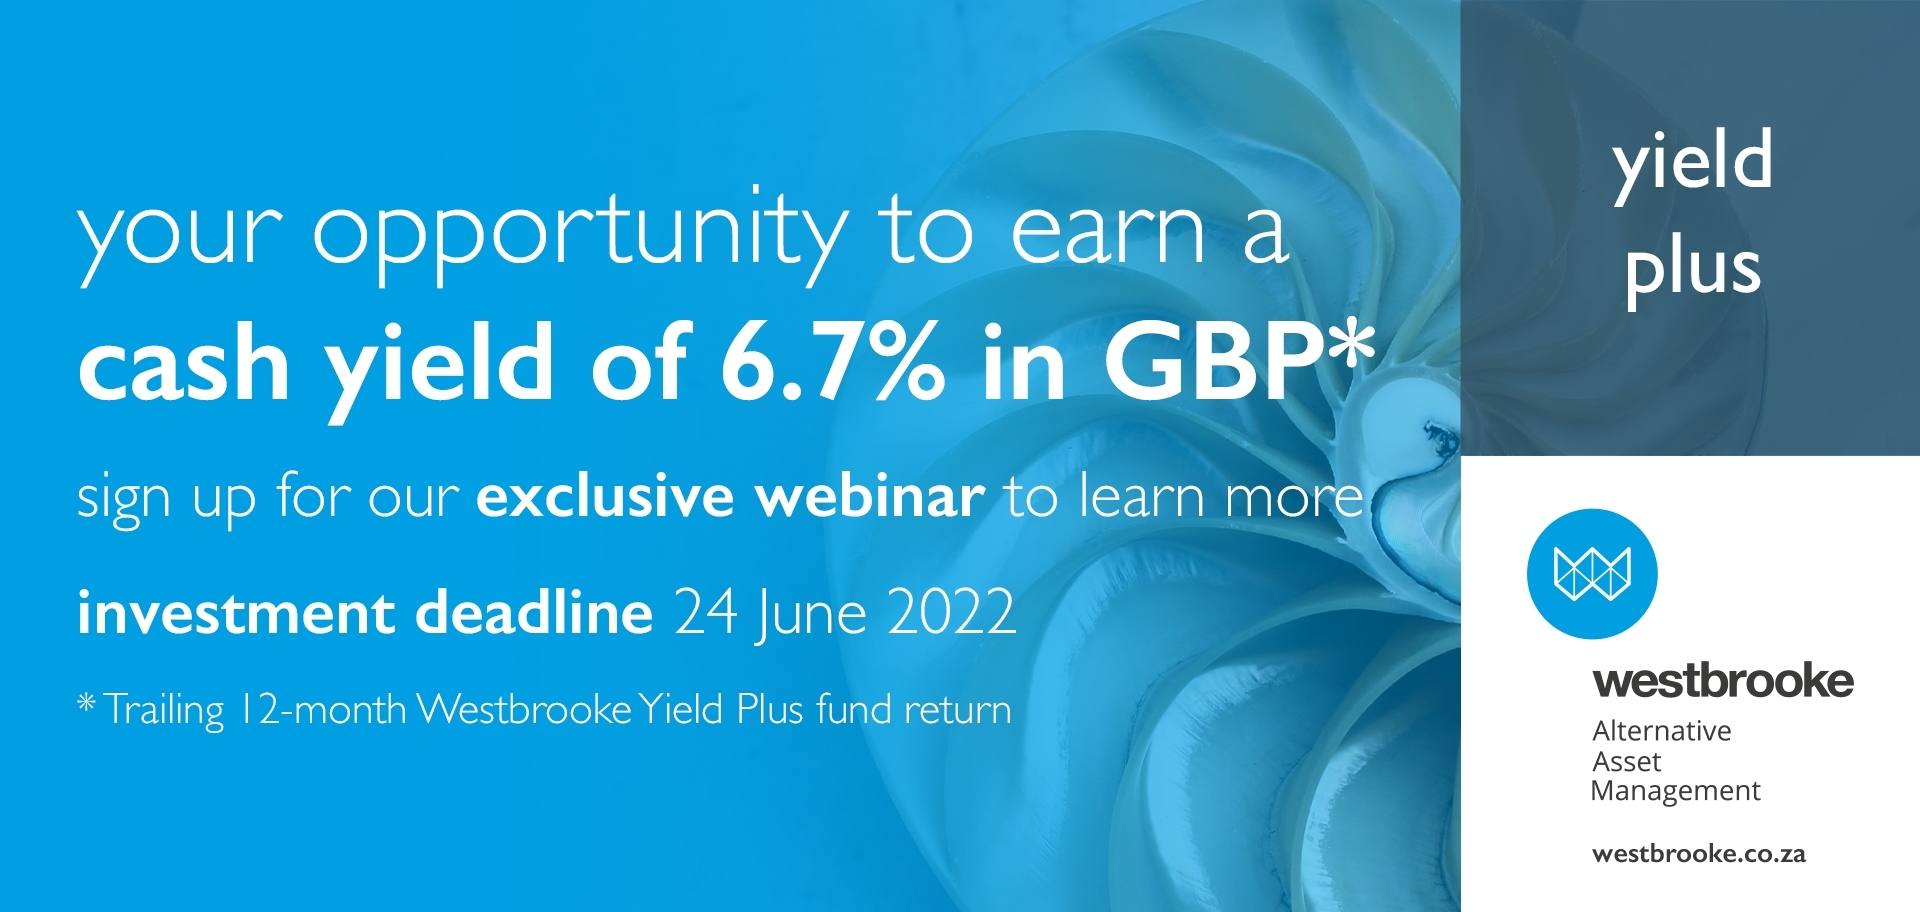 Invest in private debt yielding 6.7% in GBP